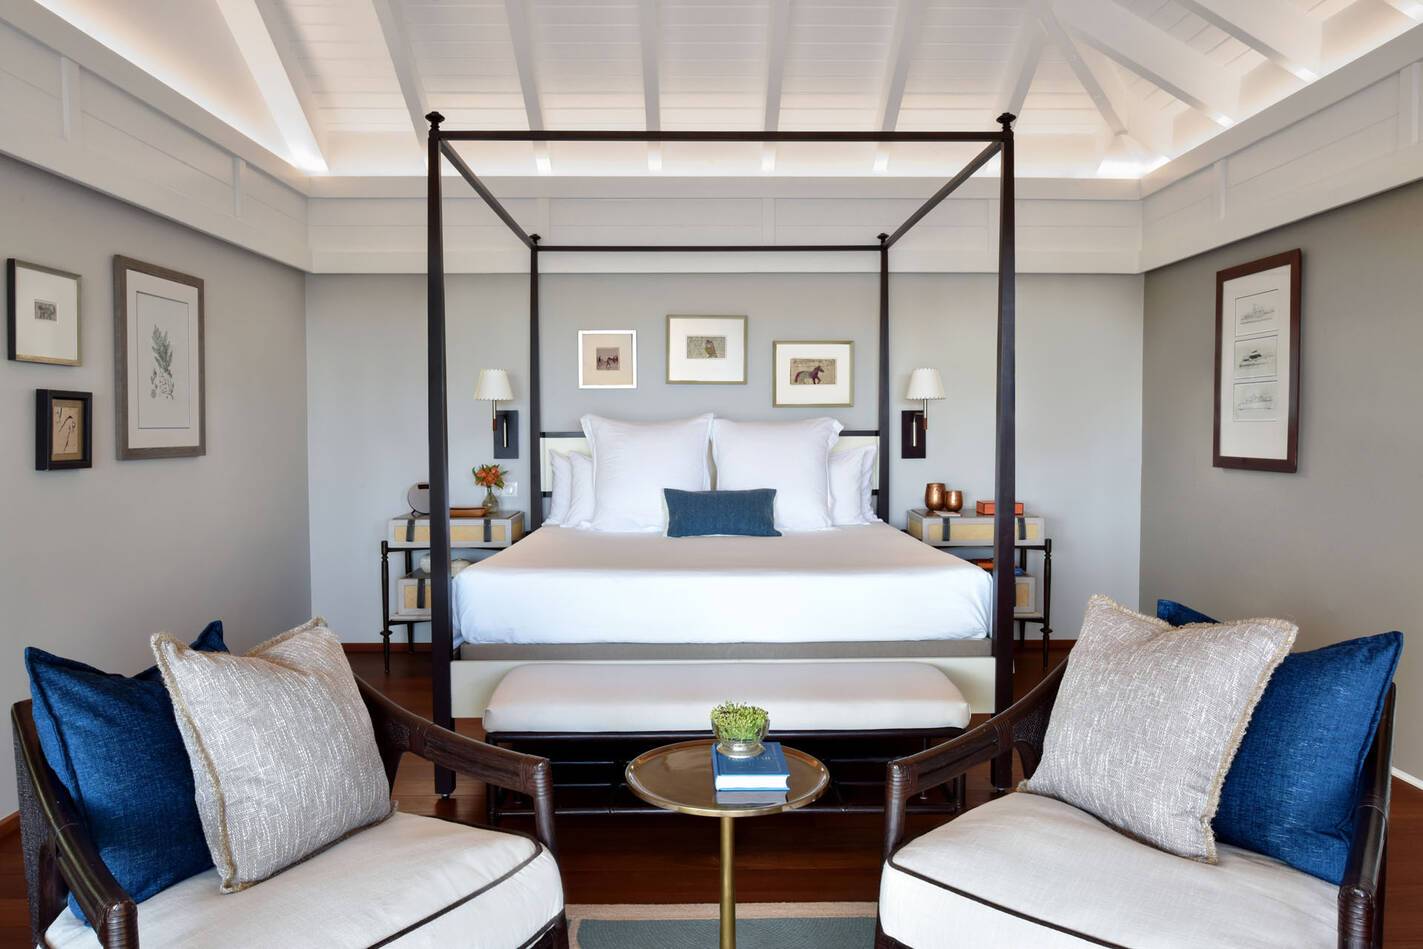 Rosewood Le Guanahani Saint Barth one bedroom suite